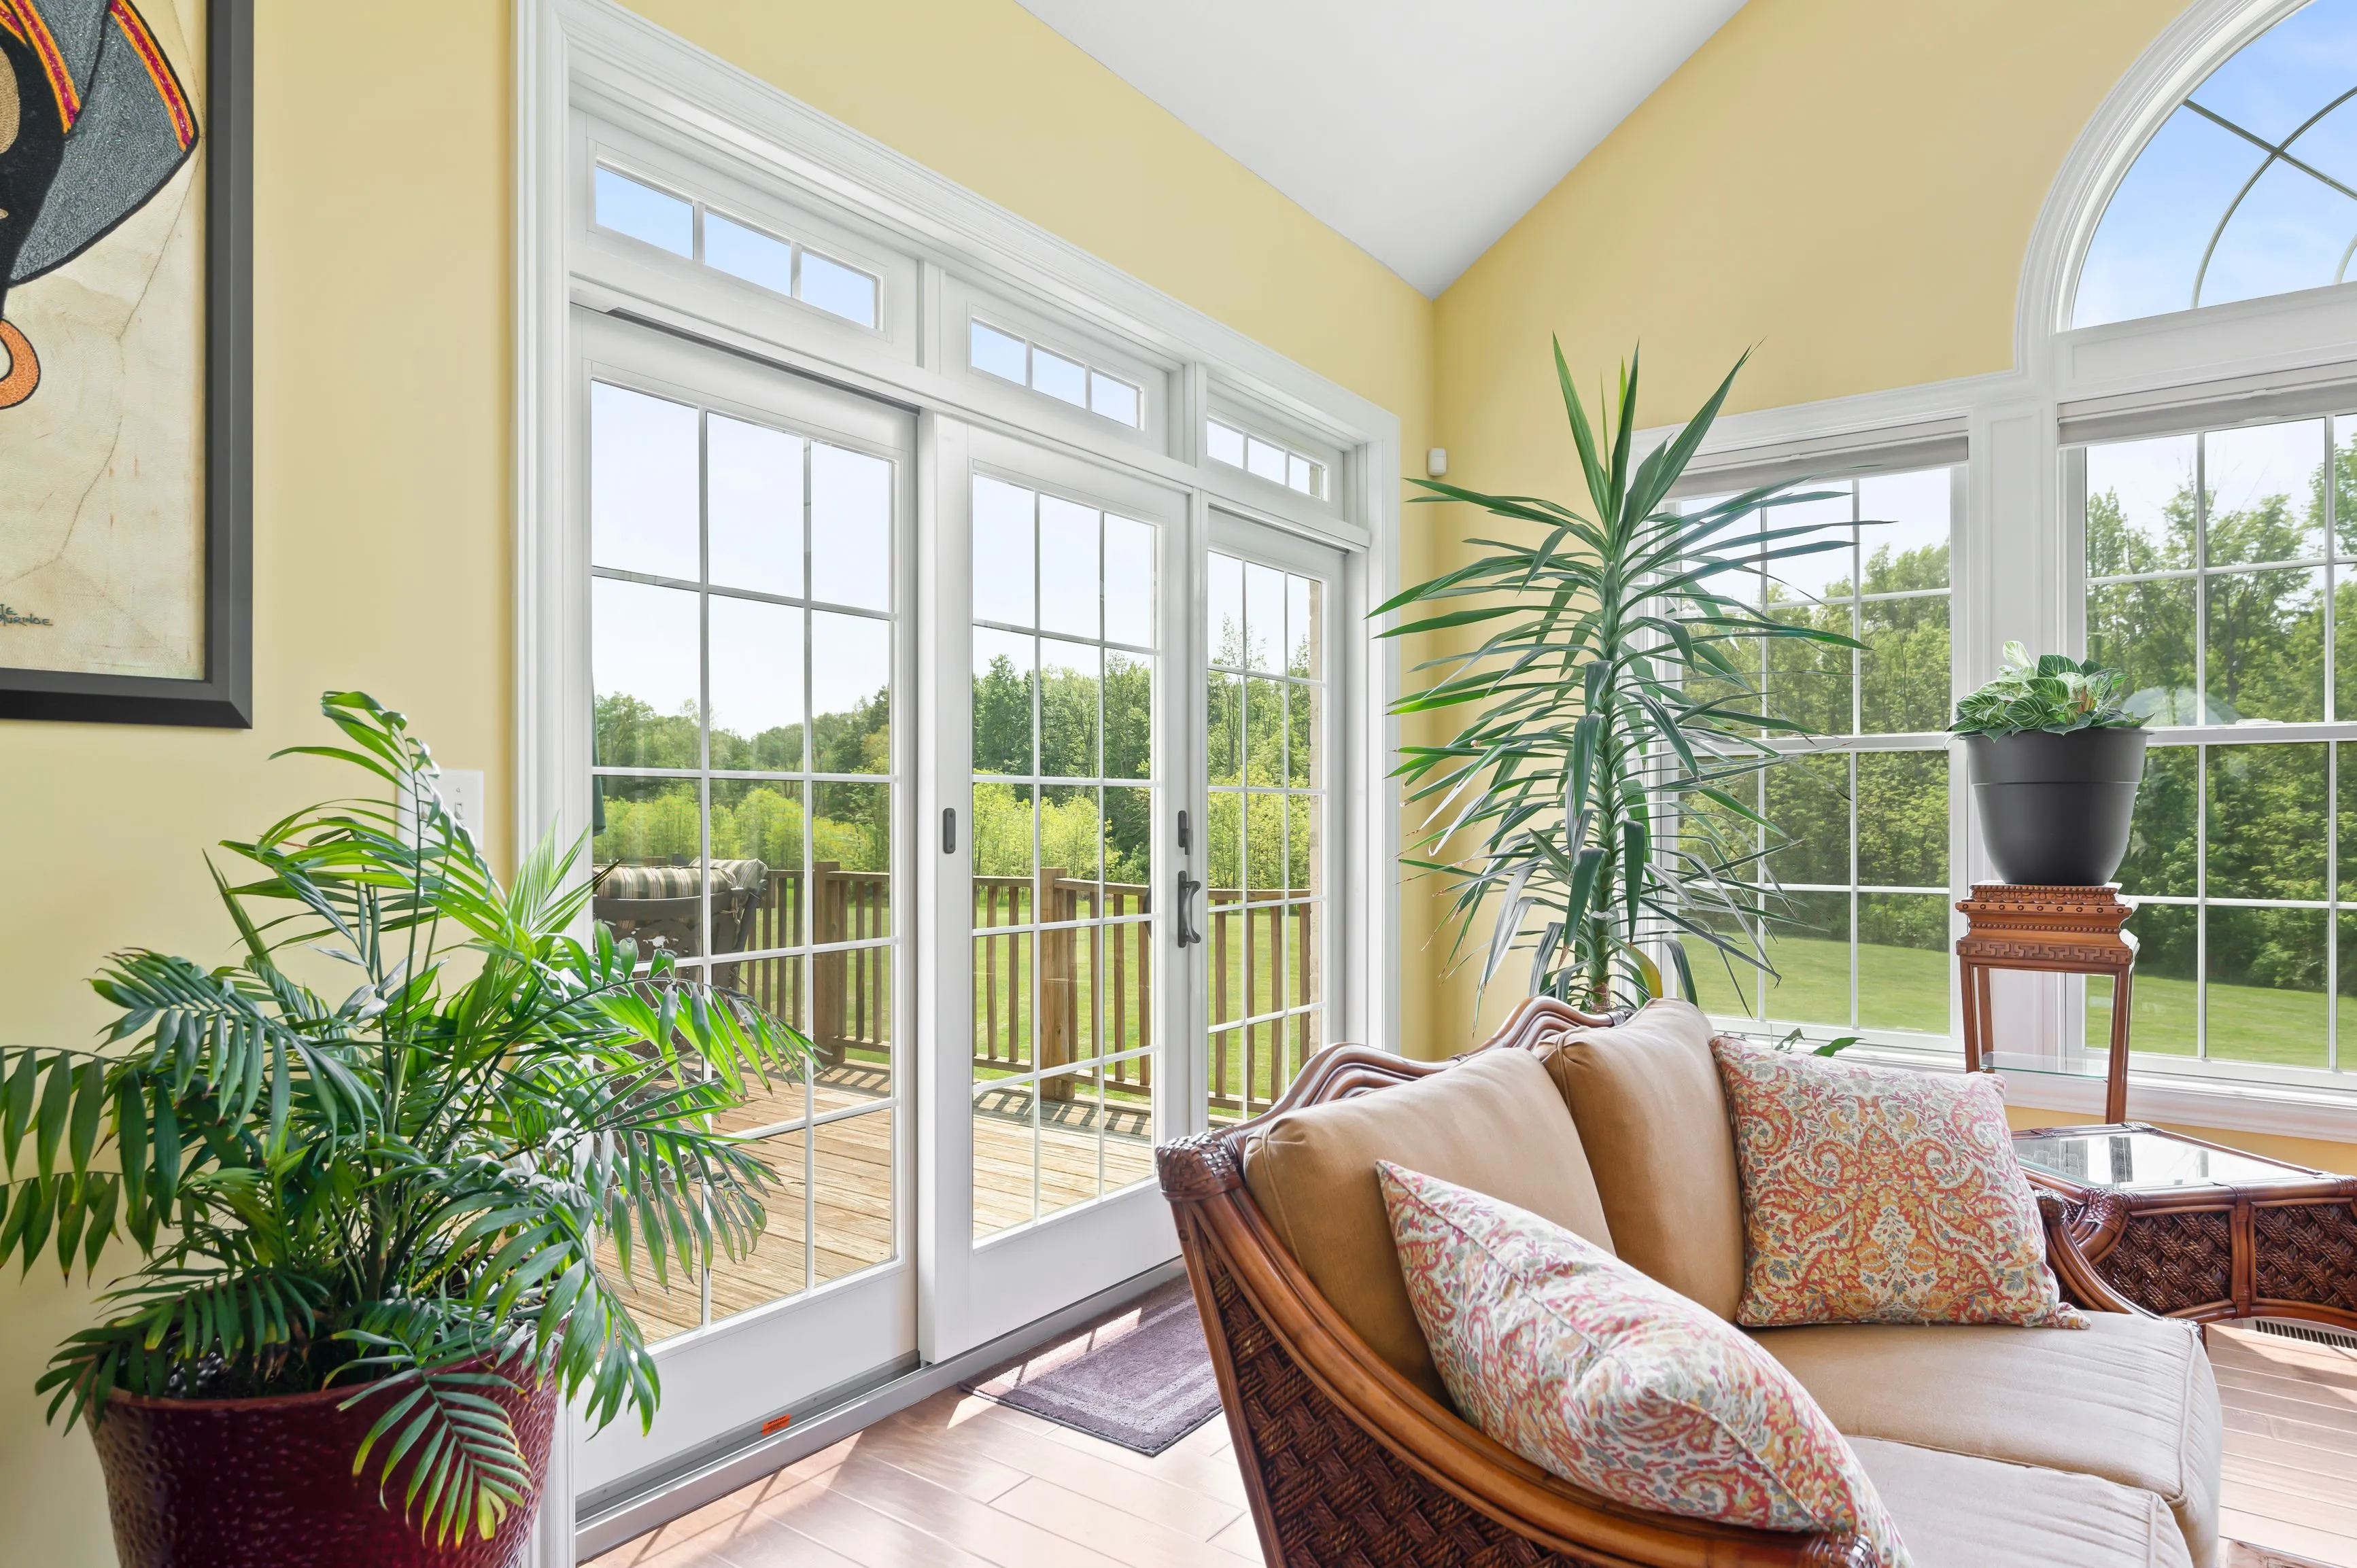 Bright, sunlit living room with a large window and French doors leading to an outdoor deck, furnished with a wicker couch and adorned with green houseplants.